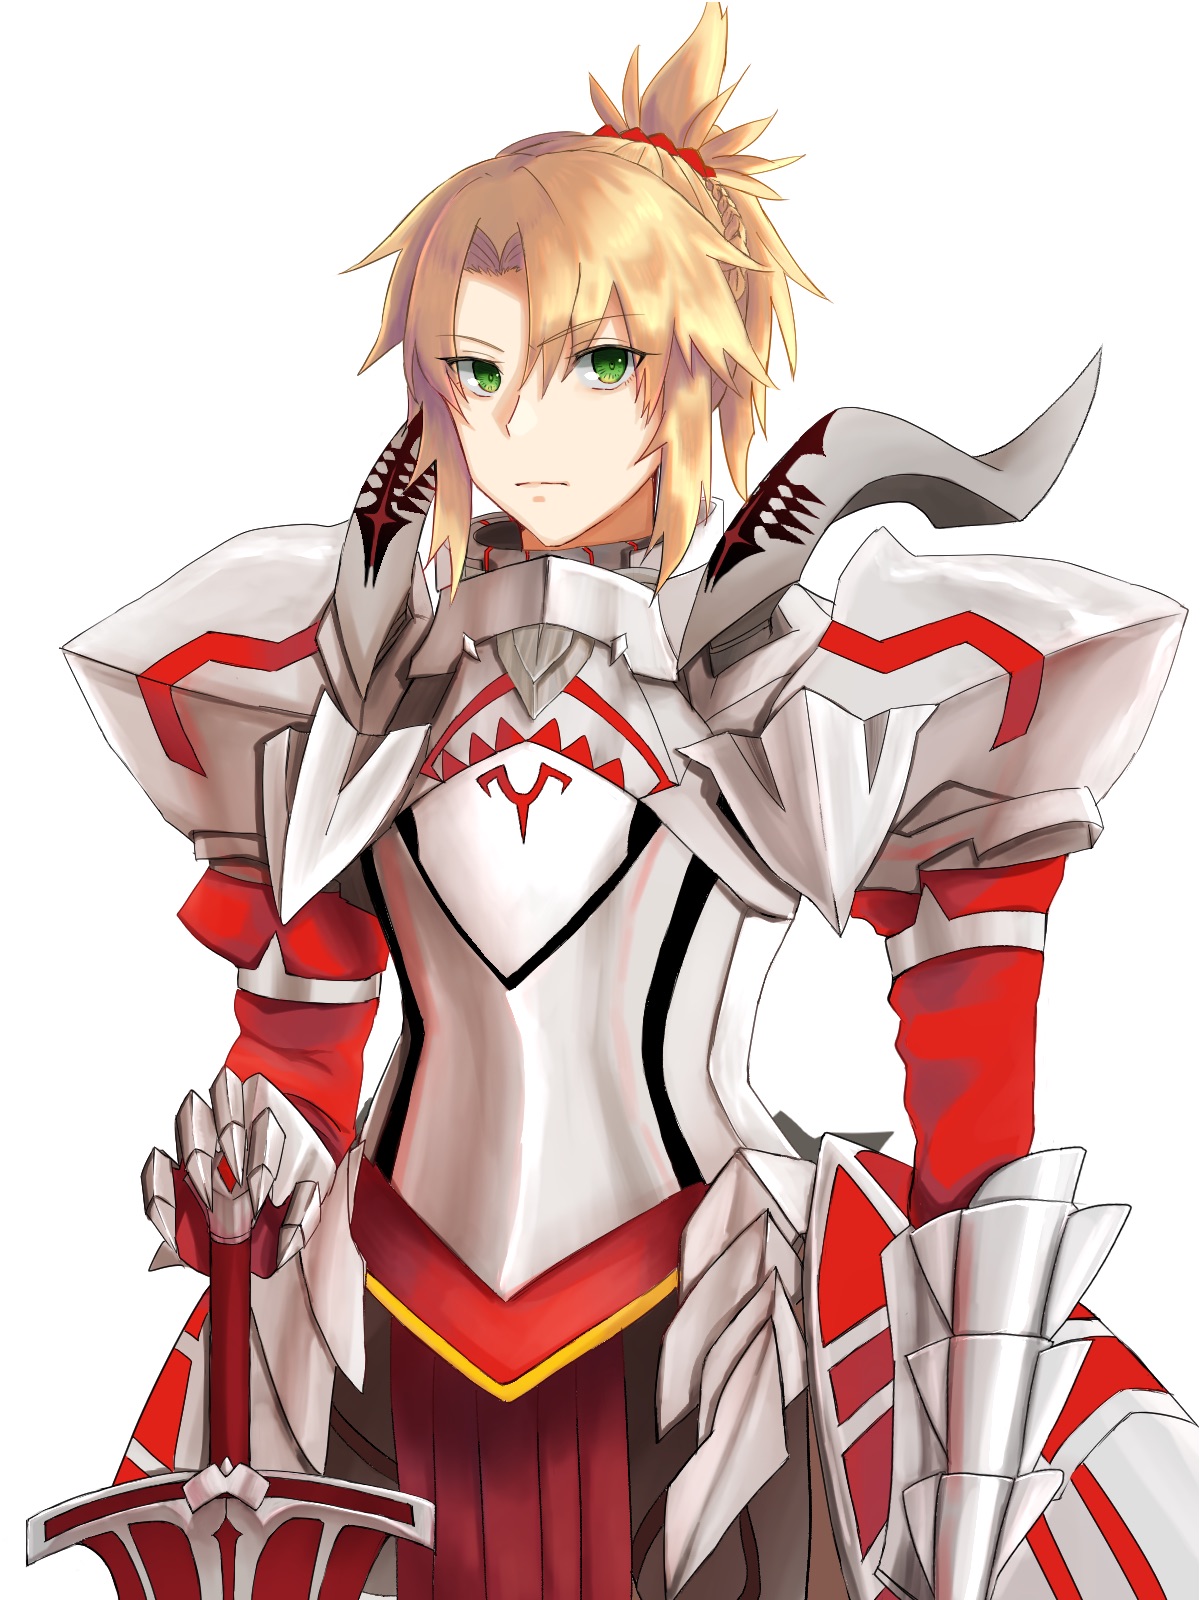 Anime 1200x1600 anime anime girls Fate series Fate/Apocrypha  Fate/Grand Order Mordred (Fate/Apocrypha) ponytail long hair blonde artwork digital art fan art